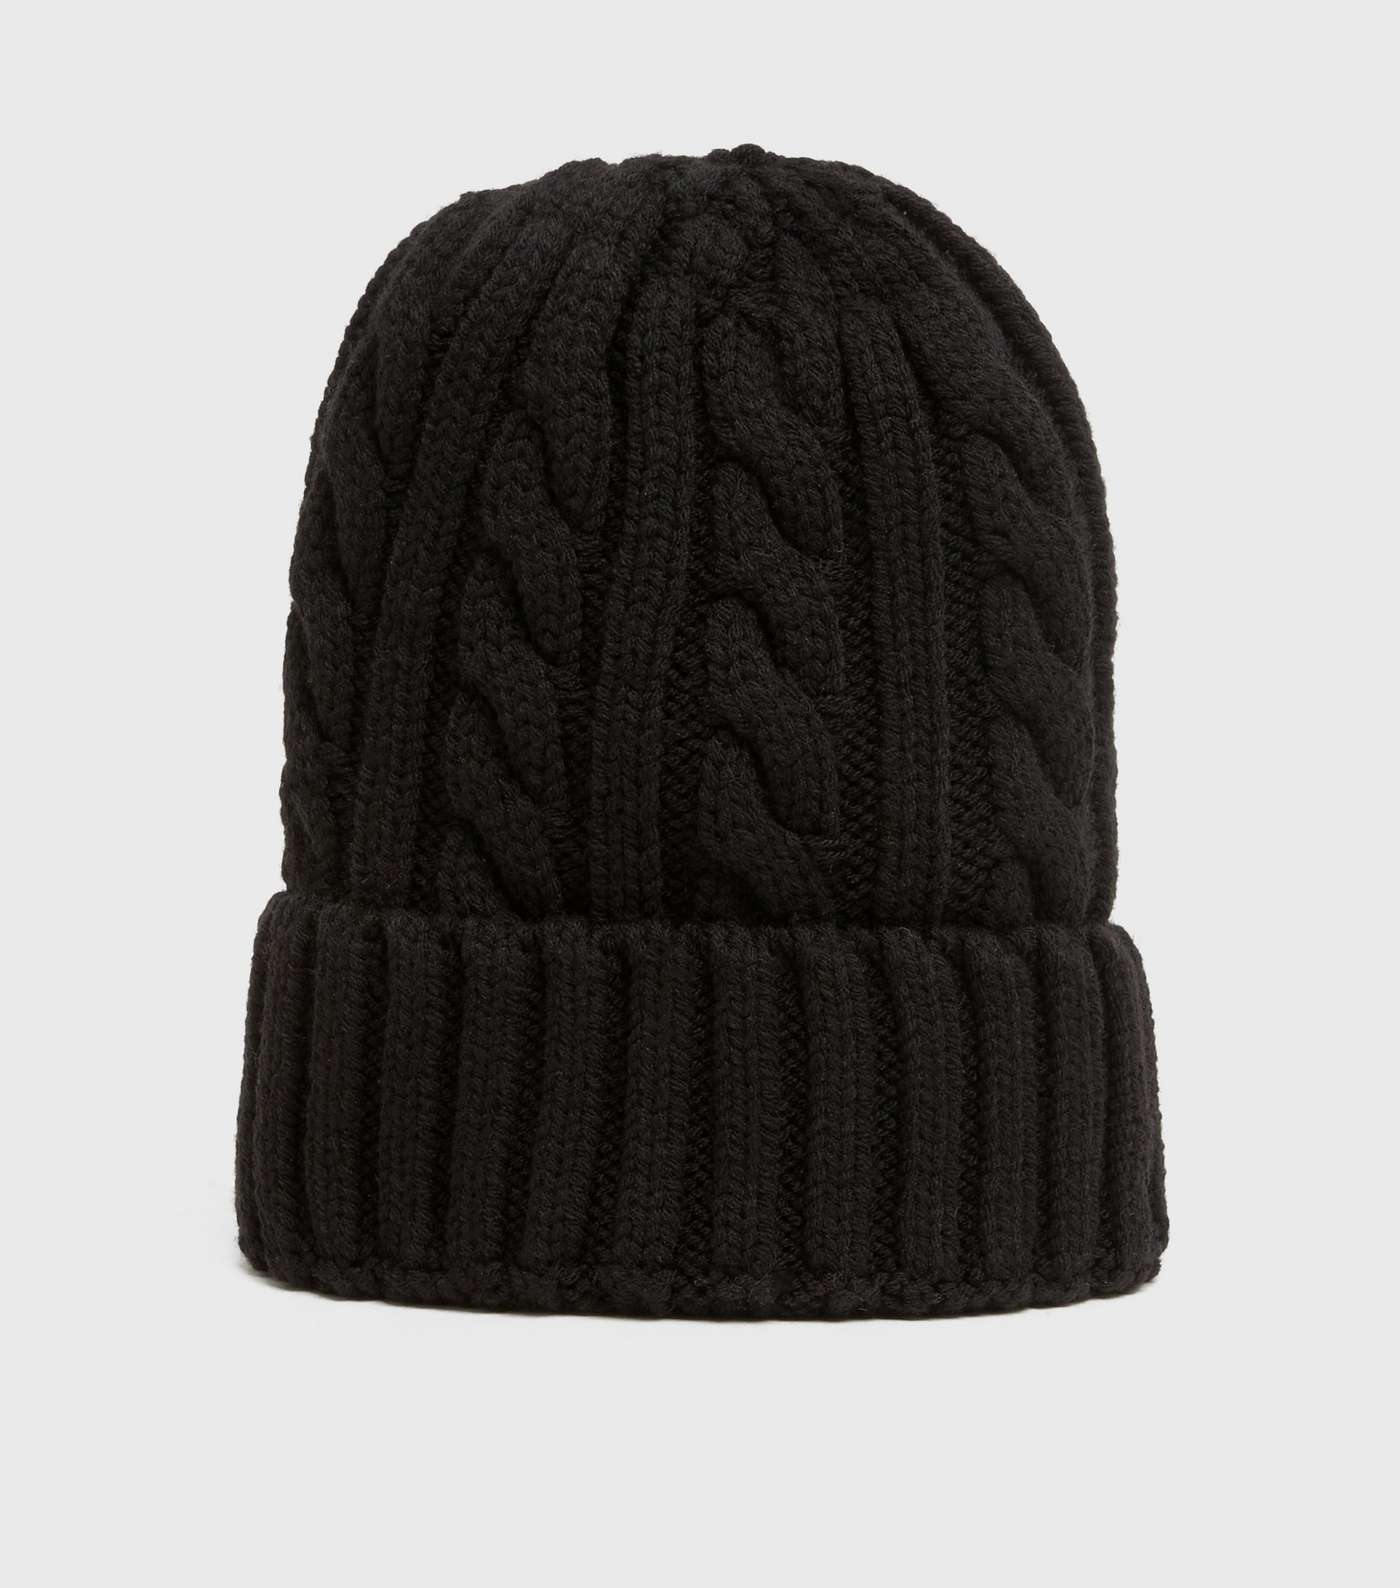 Black Cable Knit Beanie Image 2